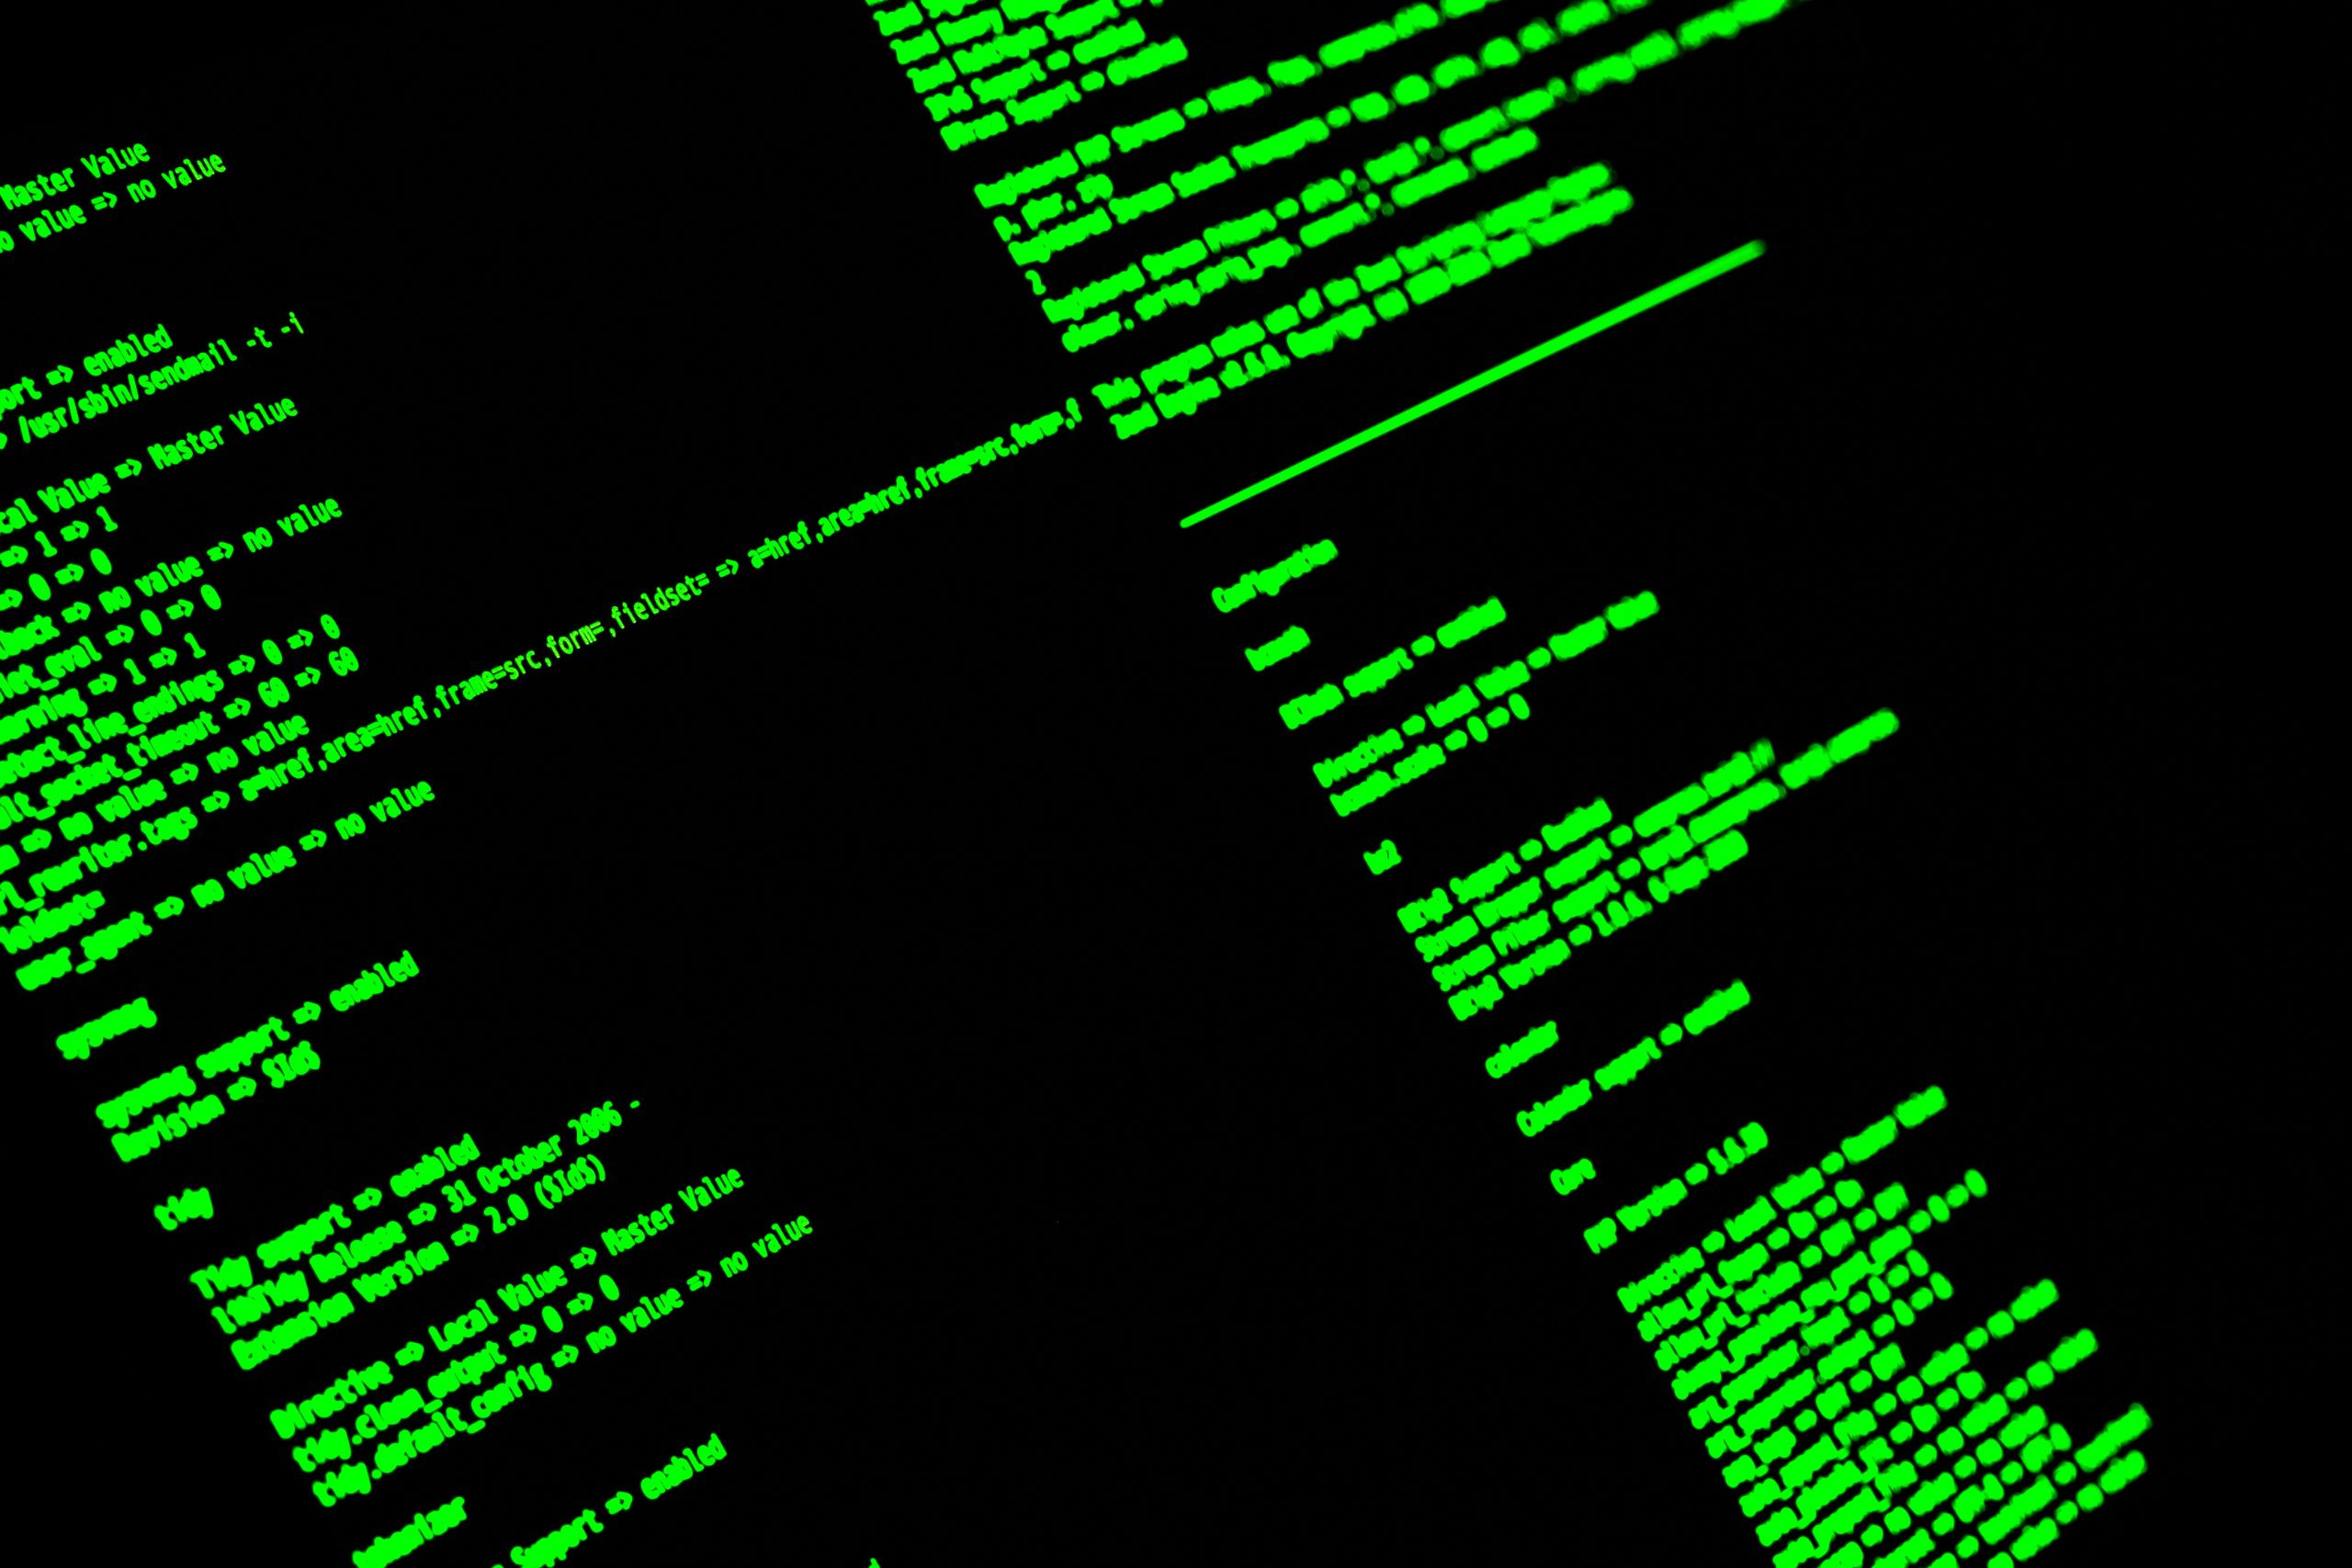 Image An illustration or screenshot of some of the above WP CLI commands executed in a terminal